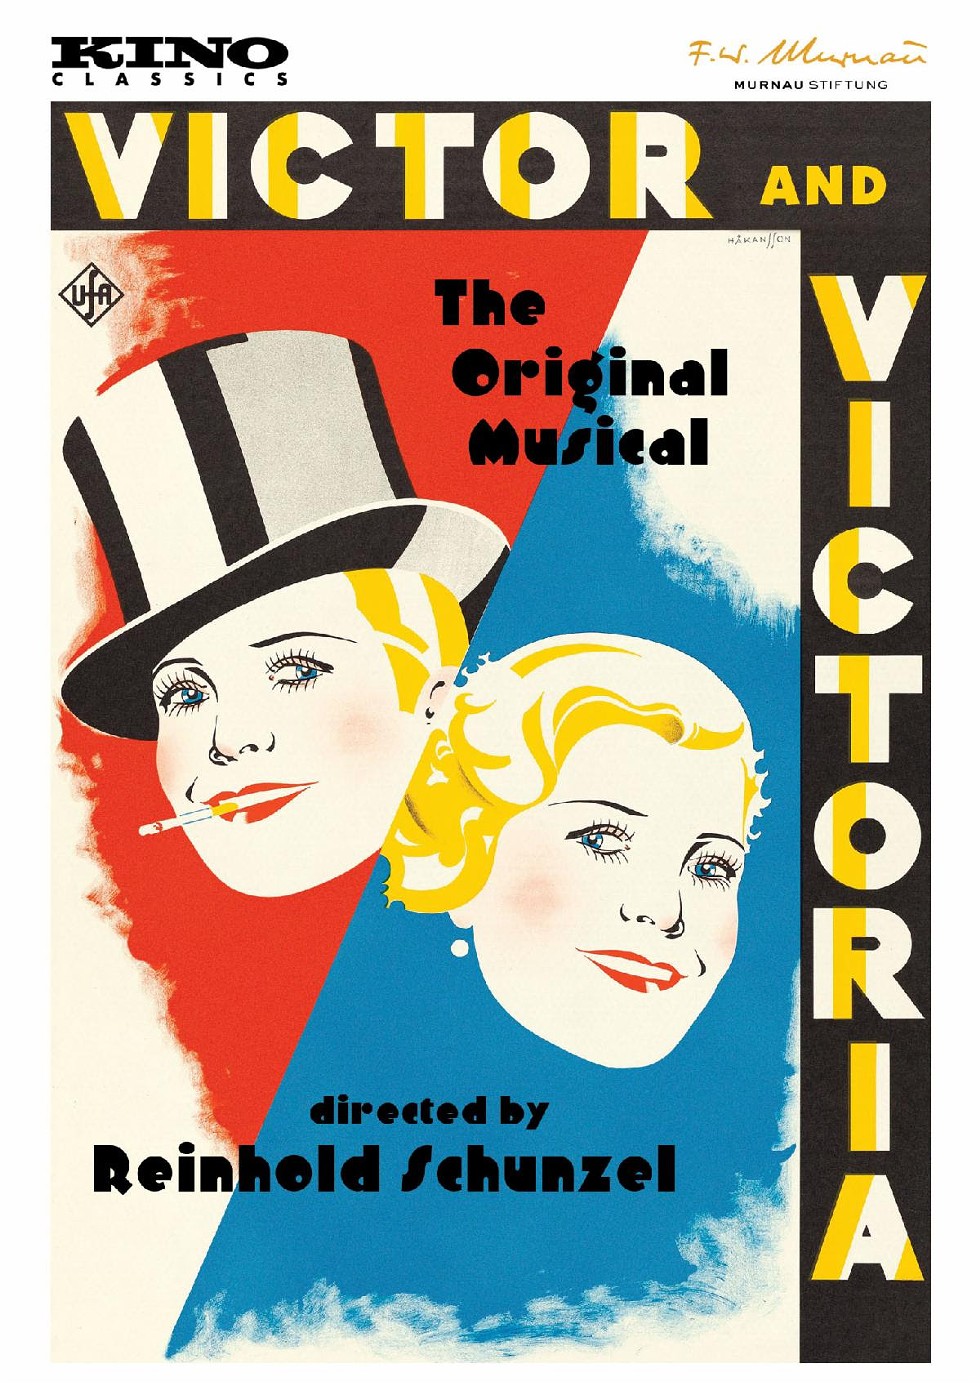 victor_and_victoria.jpg